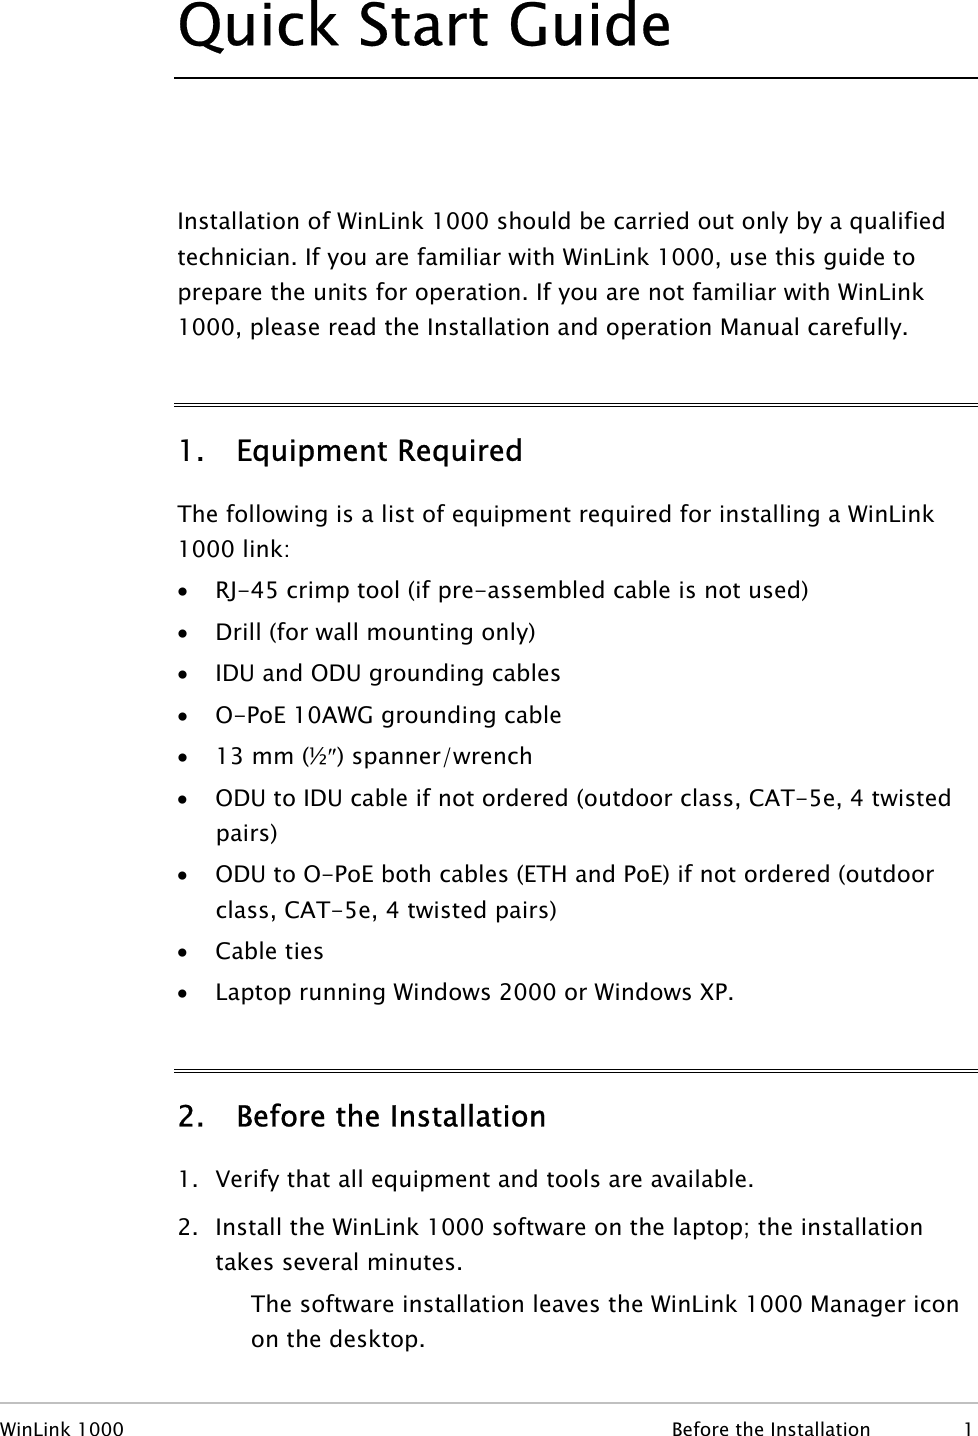 Quick Start Guide  Installation of WinLink 1000 should be carried out only by a qualified technician. If you are familiar with WinLink 1000, use this guide to prepare the units for operation. If you are not familiar with WinLink 1000, please read the Installation and operation Manual carefully. 1. Equipment Required The following is a list of equipment required for installing a WinLink 1000 link: • RJ-45 crimp tool (if pre-assembled cable is not used) • Drill (for wall mounting only) • IDU and ODU grounding cables • O-PoE 10AWG grounding cable • 13 mm (½″) spanner/wrench • ODU to IDU cable if not ordered (outdoor class, CAT-5e, 4 twisted pairs) • ODU to O-PoE both cables (ETH and PoE) if not ordered (outdoor class, CAT-5e, 4 twisted pairs) • Cable ties • Laptop running Windows 2000 or Windows XP. 2. Before the Installation 1. Verify that all equipment and tools are available. 2. Install the WinLink 1000 software on the laptop; the installation takes several minutes. The software installation leaves the WinLink 1000 Manager icon on the desktop. WinLink 1000  Before the Installation  1 